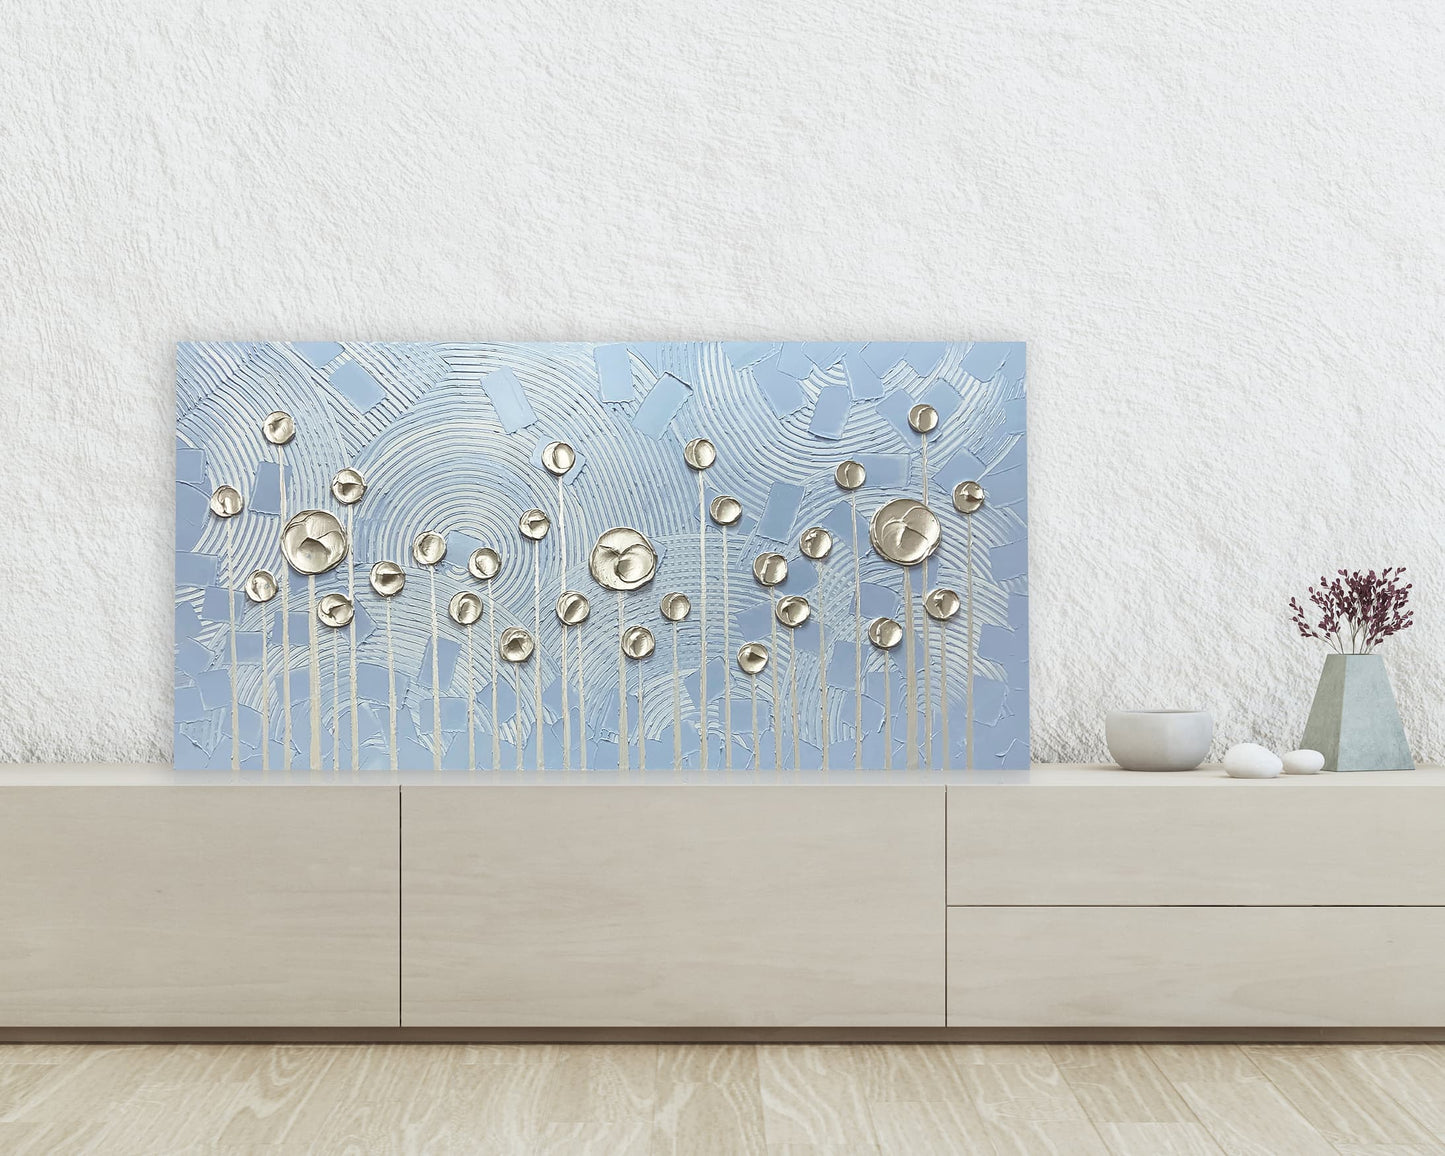 Abstract Art "Blooms at Dawn" Hand-painted on Wrapped Canvas for Home Decor